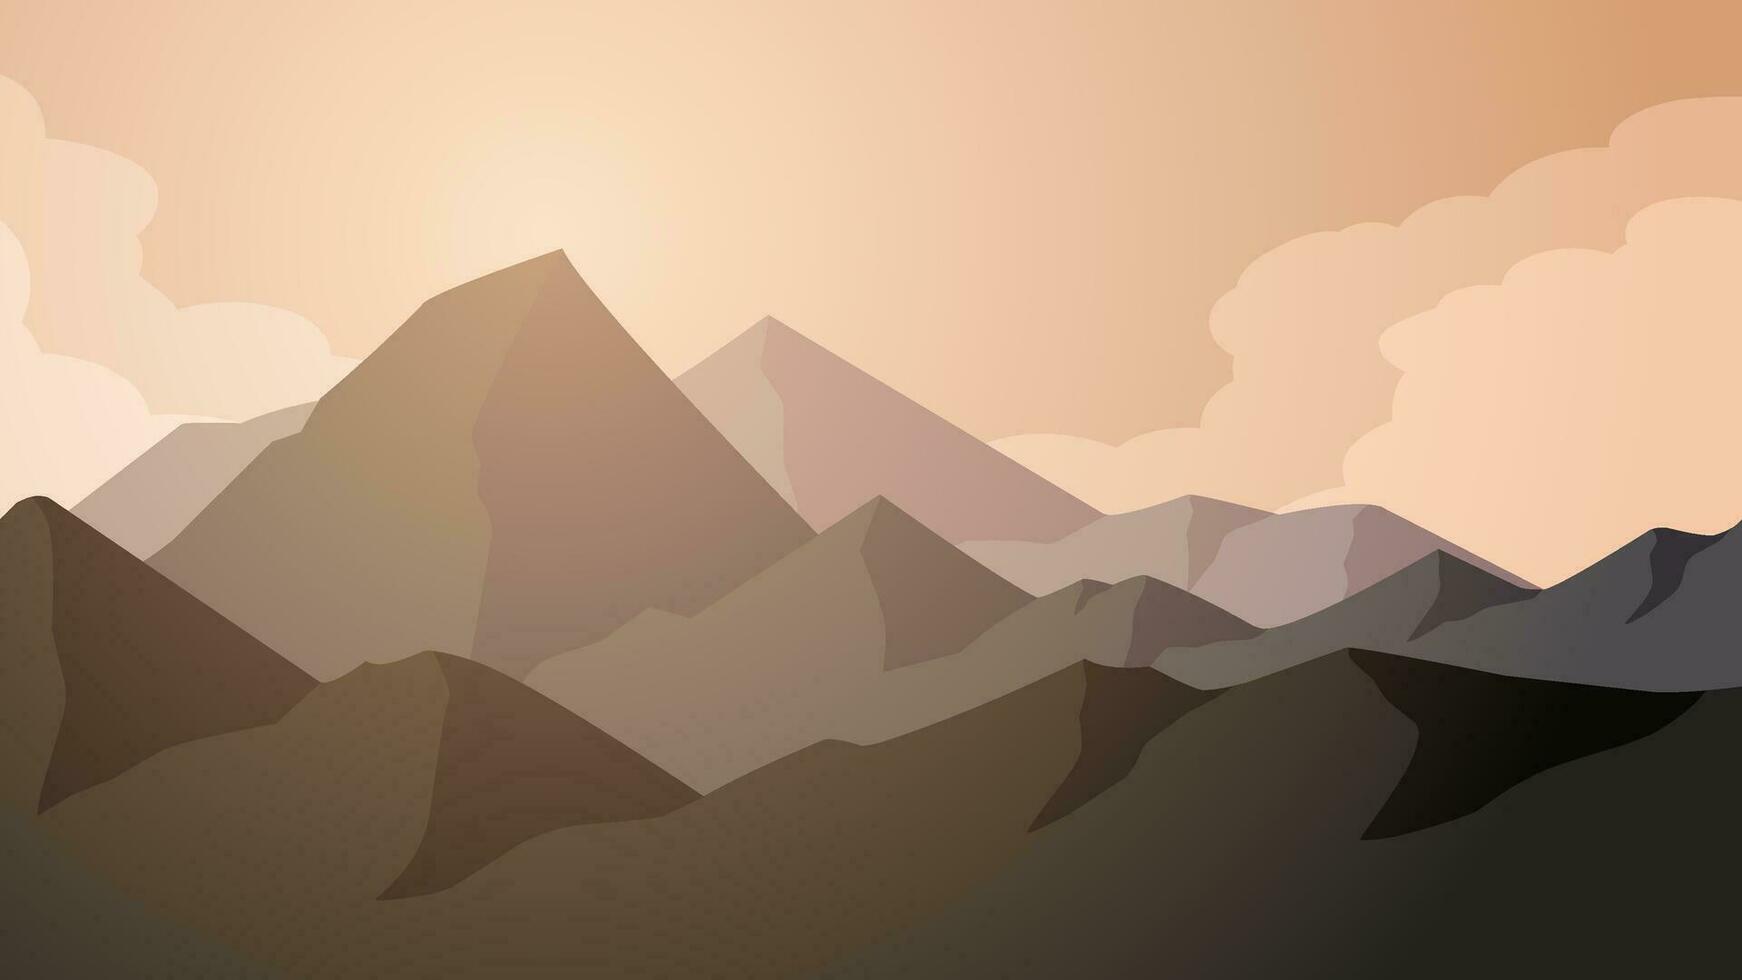 Mountain landscape vector illustration. Scenery of mountain range with cloudy sky in the morning. Mountain landscape for background, wallpaper or illustration